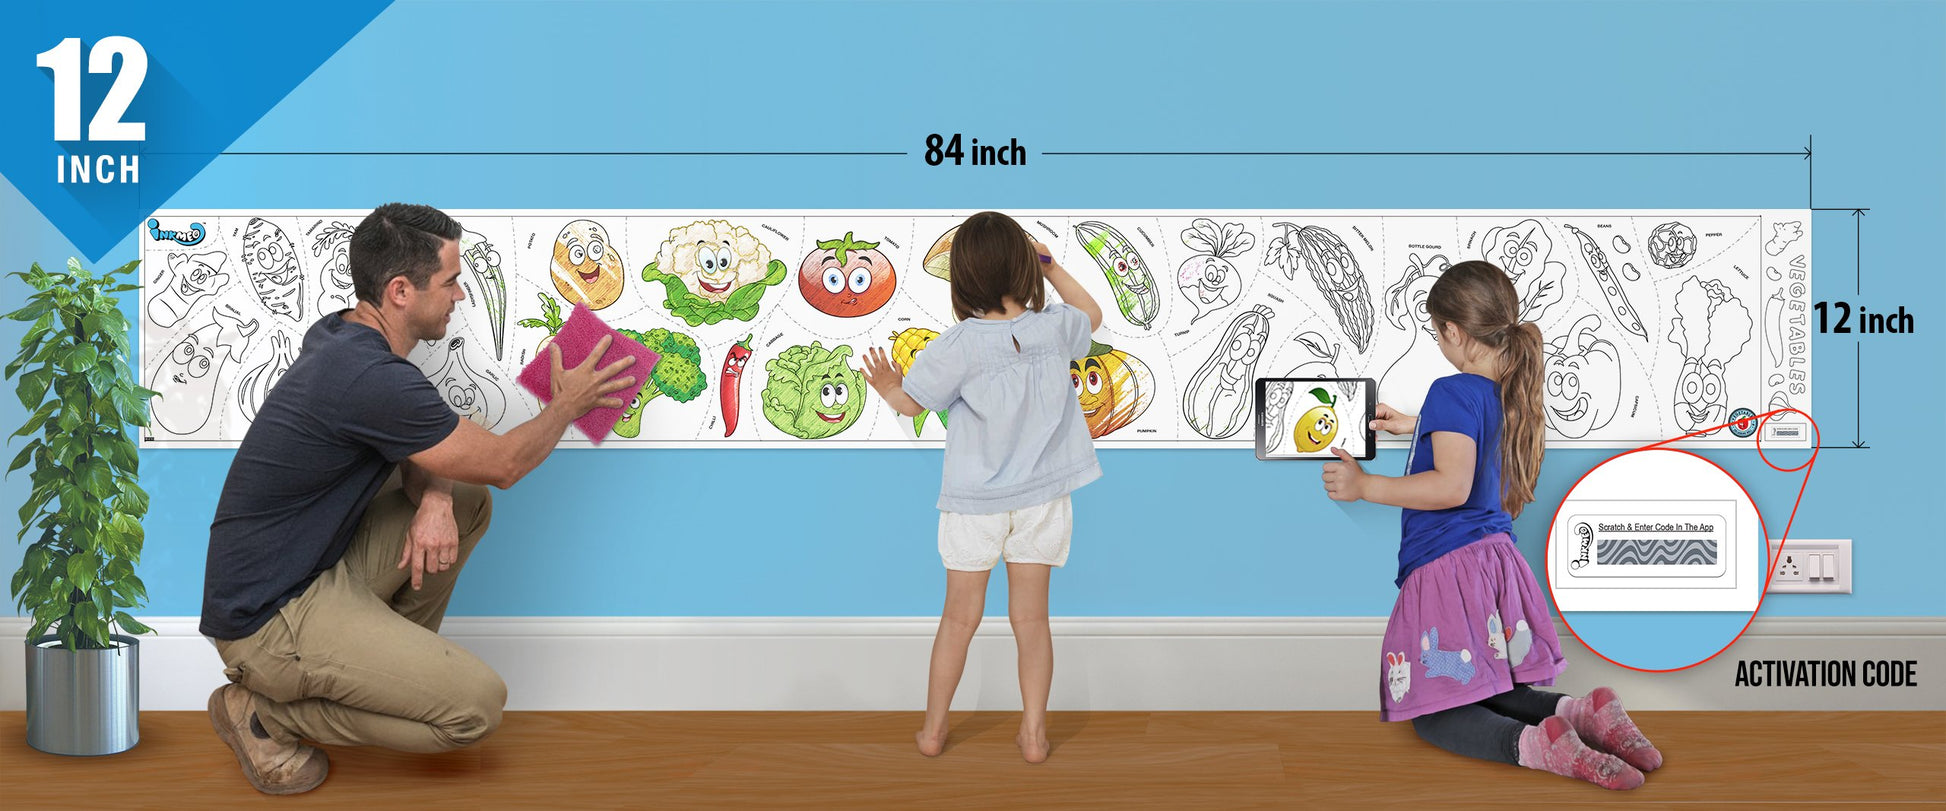 The image depicts a father and his two daughters enjoying a bonding moment while coloring vegetables sheet attached to the wall.